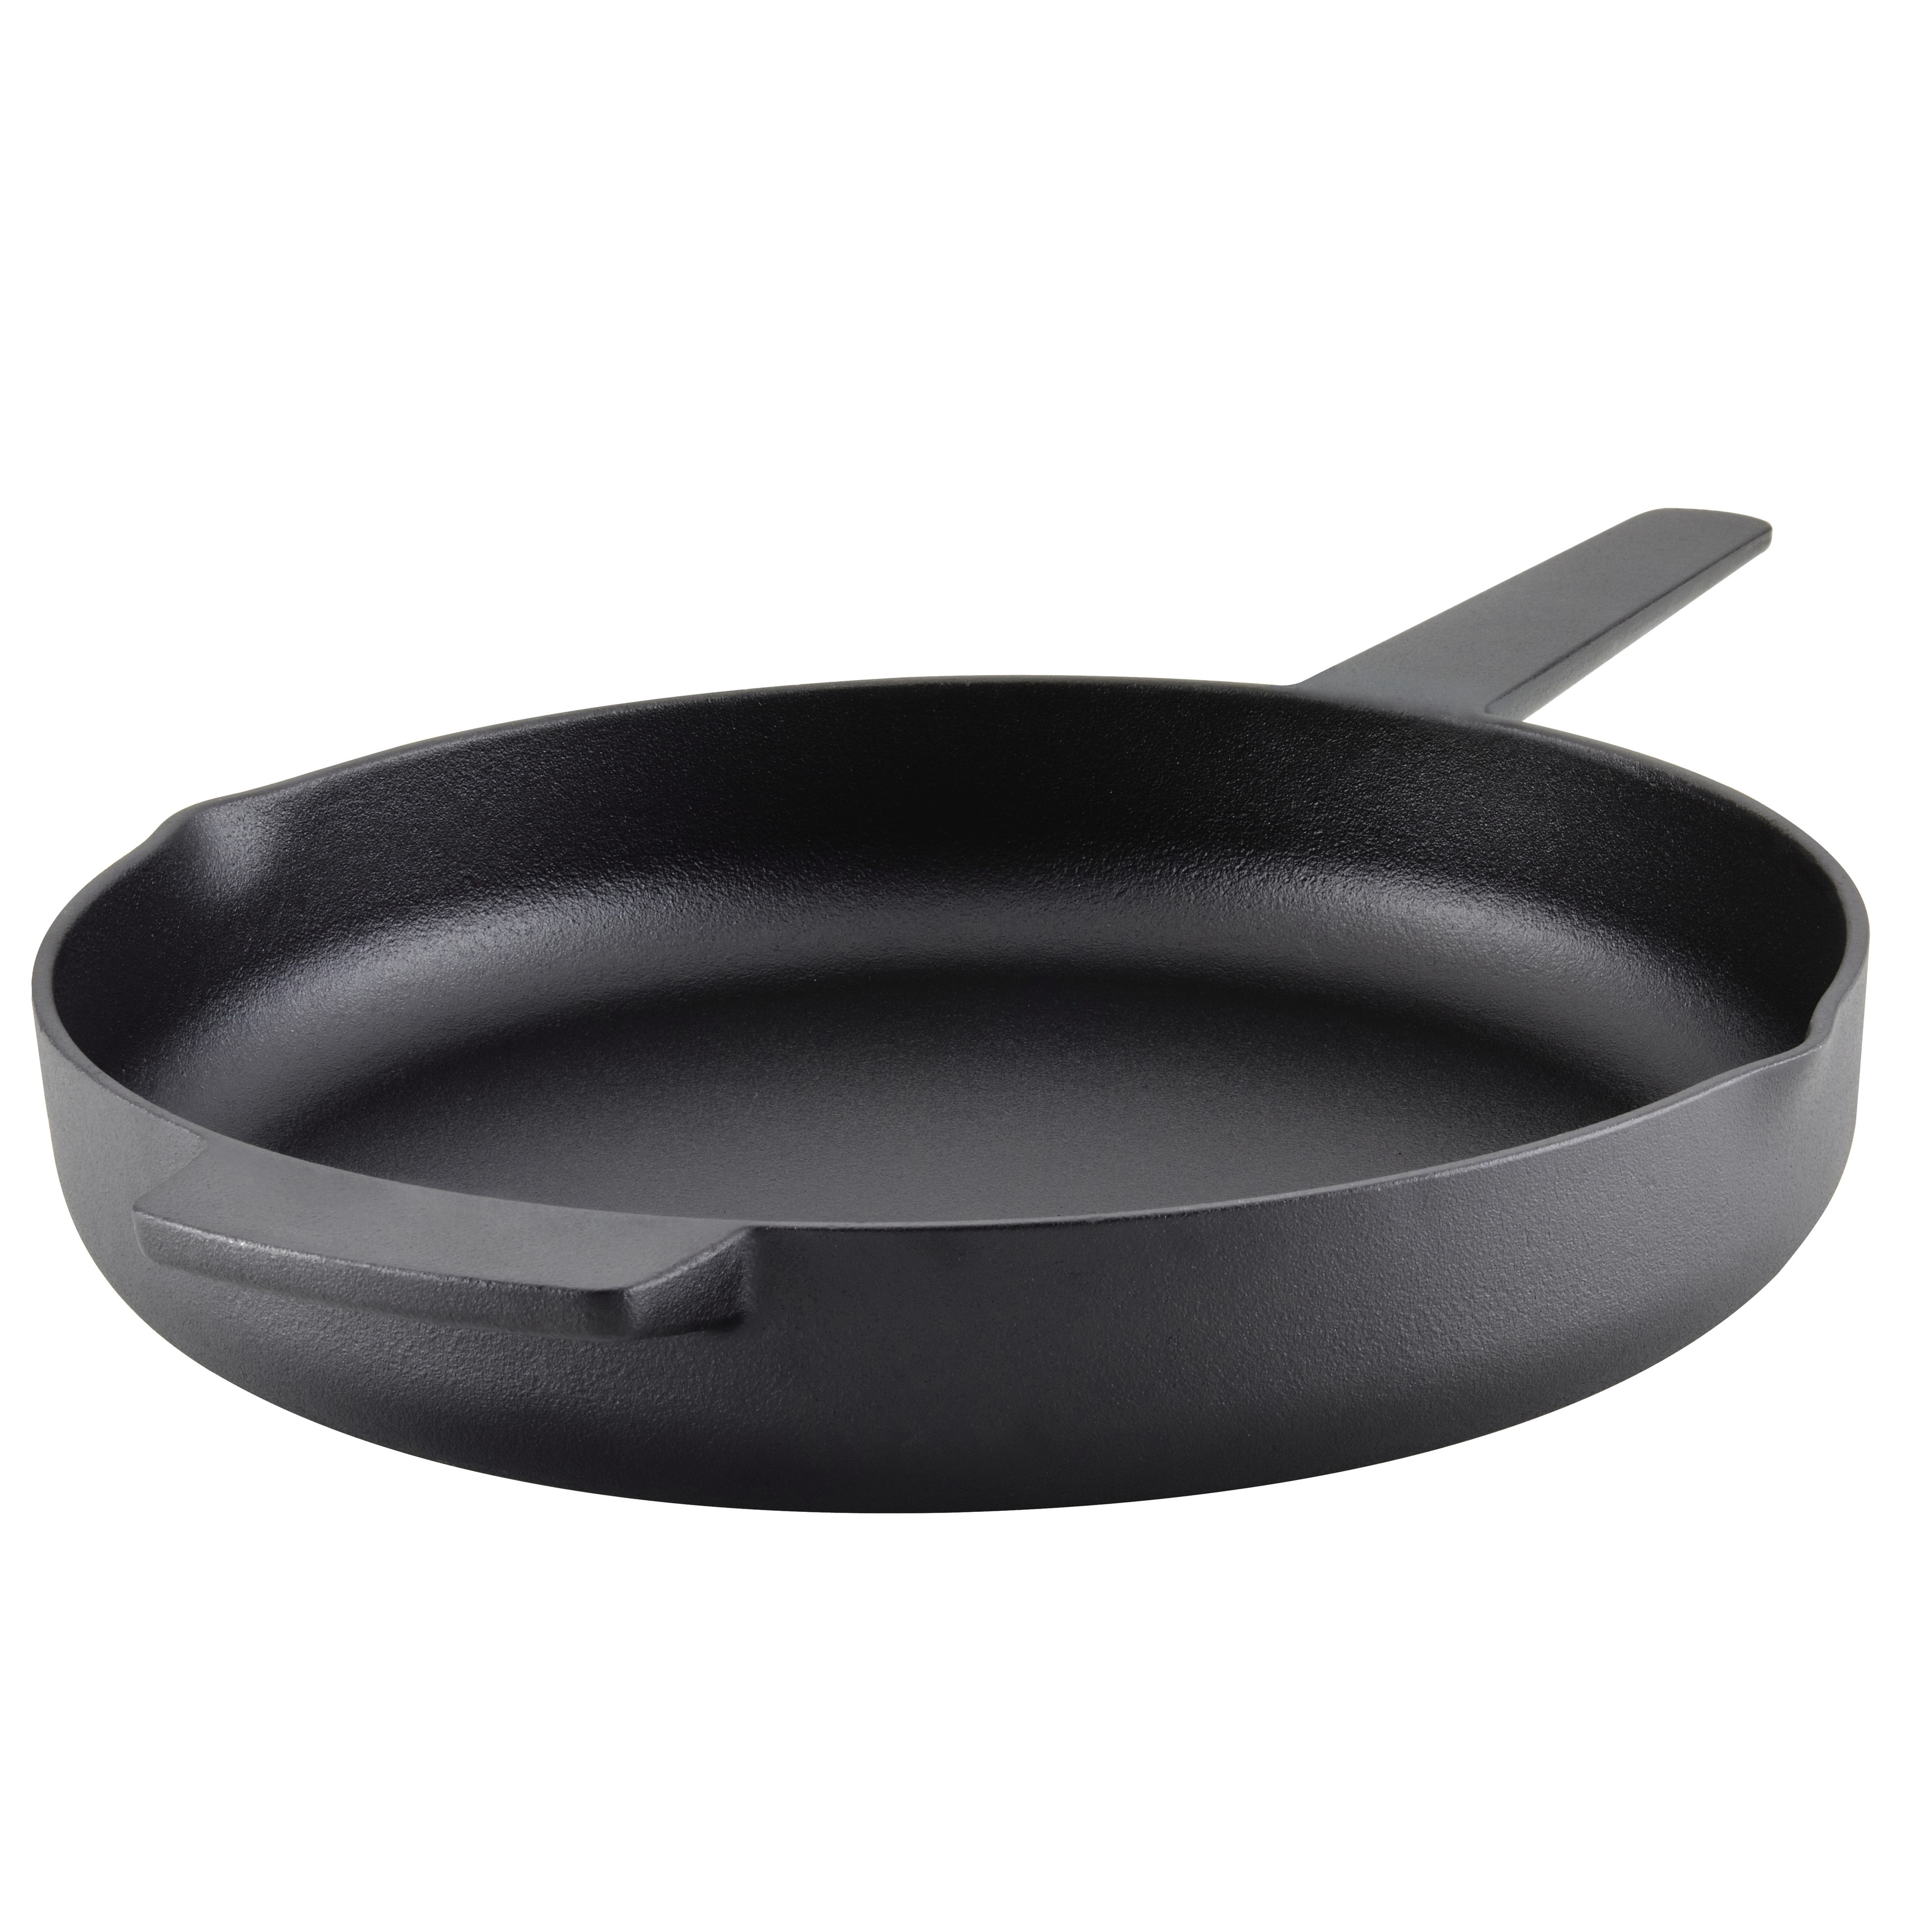 https://ak1.ostkcdn.com/images/products/is/images/direct/a94e09cd73fa7e02dc8822be8a2f99a2370c6743/KitchenAid-Seasoned-Cast-Iron-Skillet%2C-12in%2C-Cast-Iron-Black.jpg